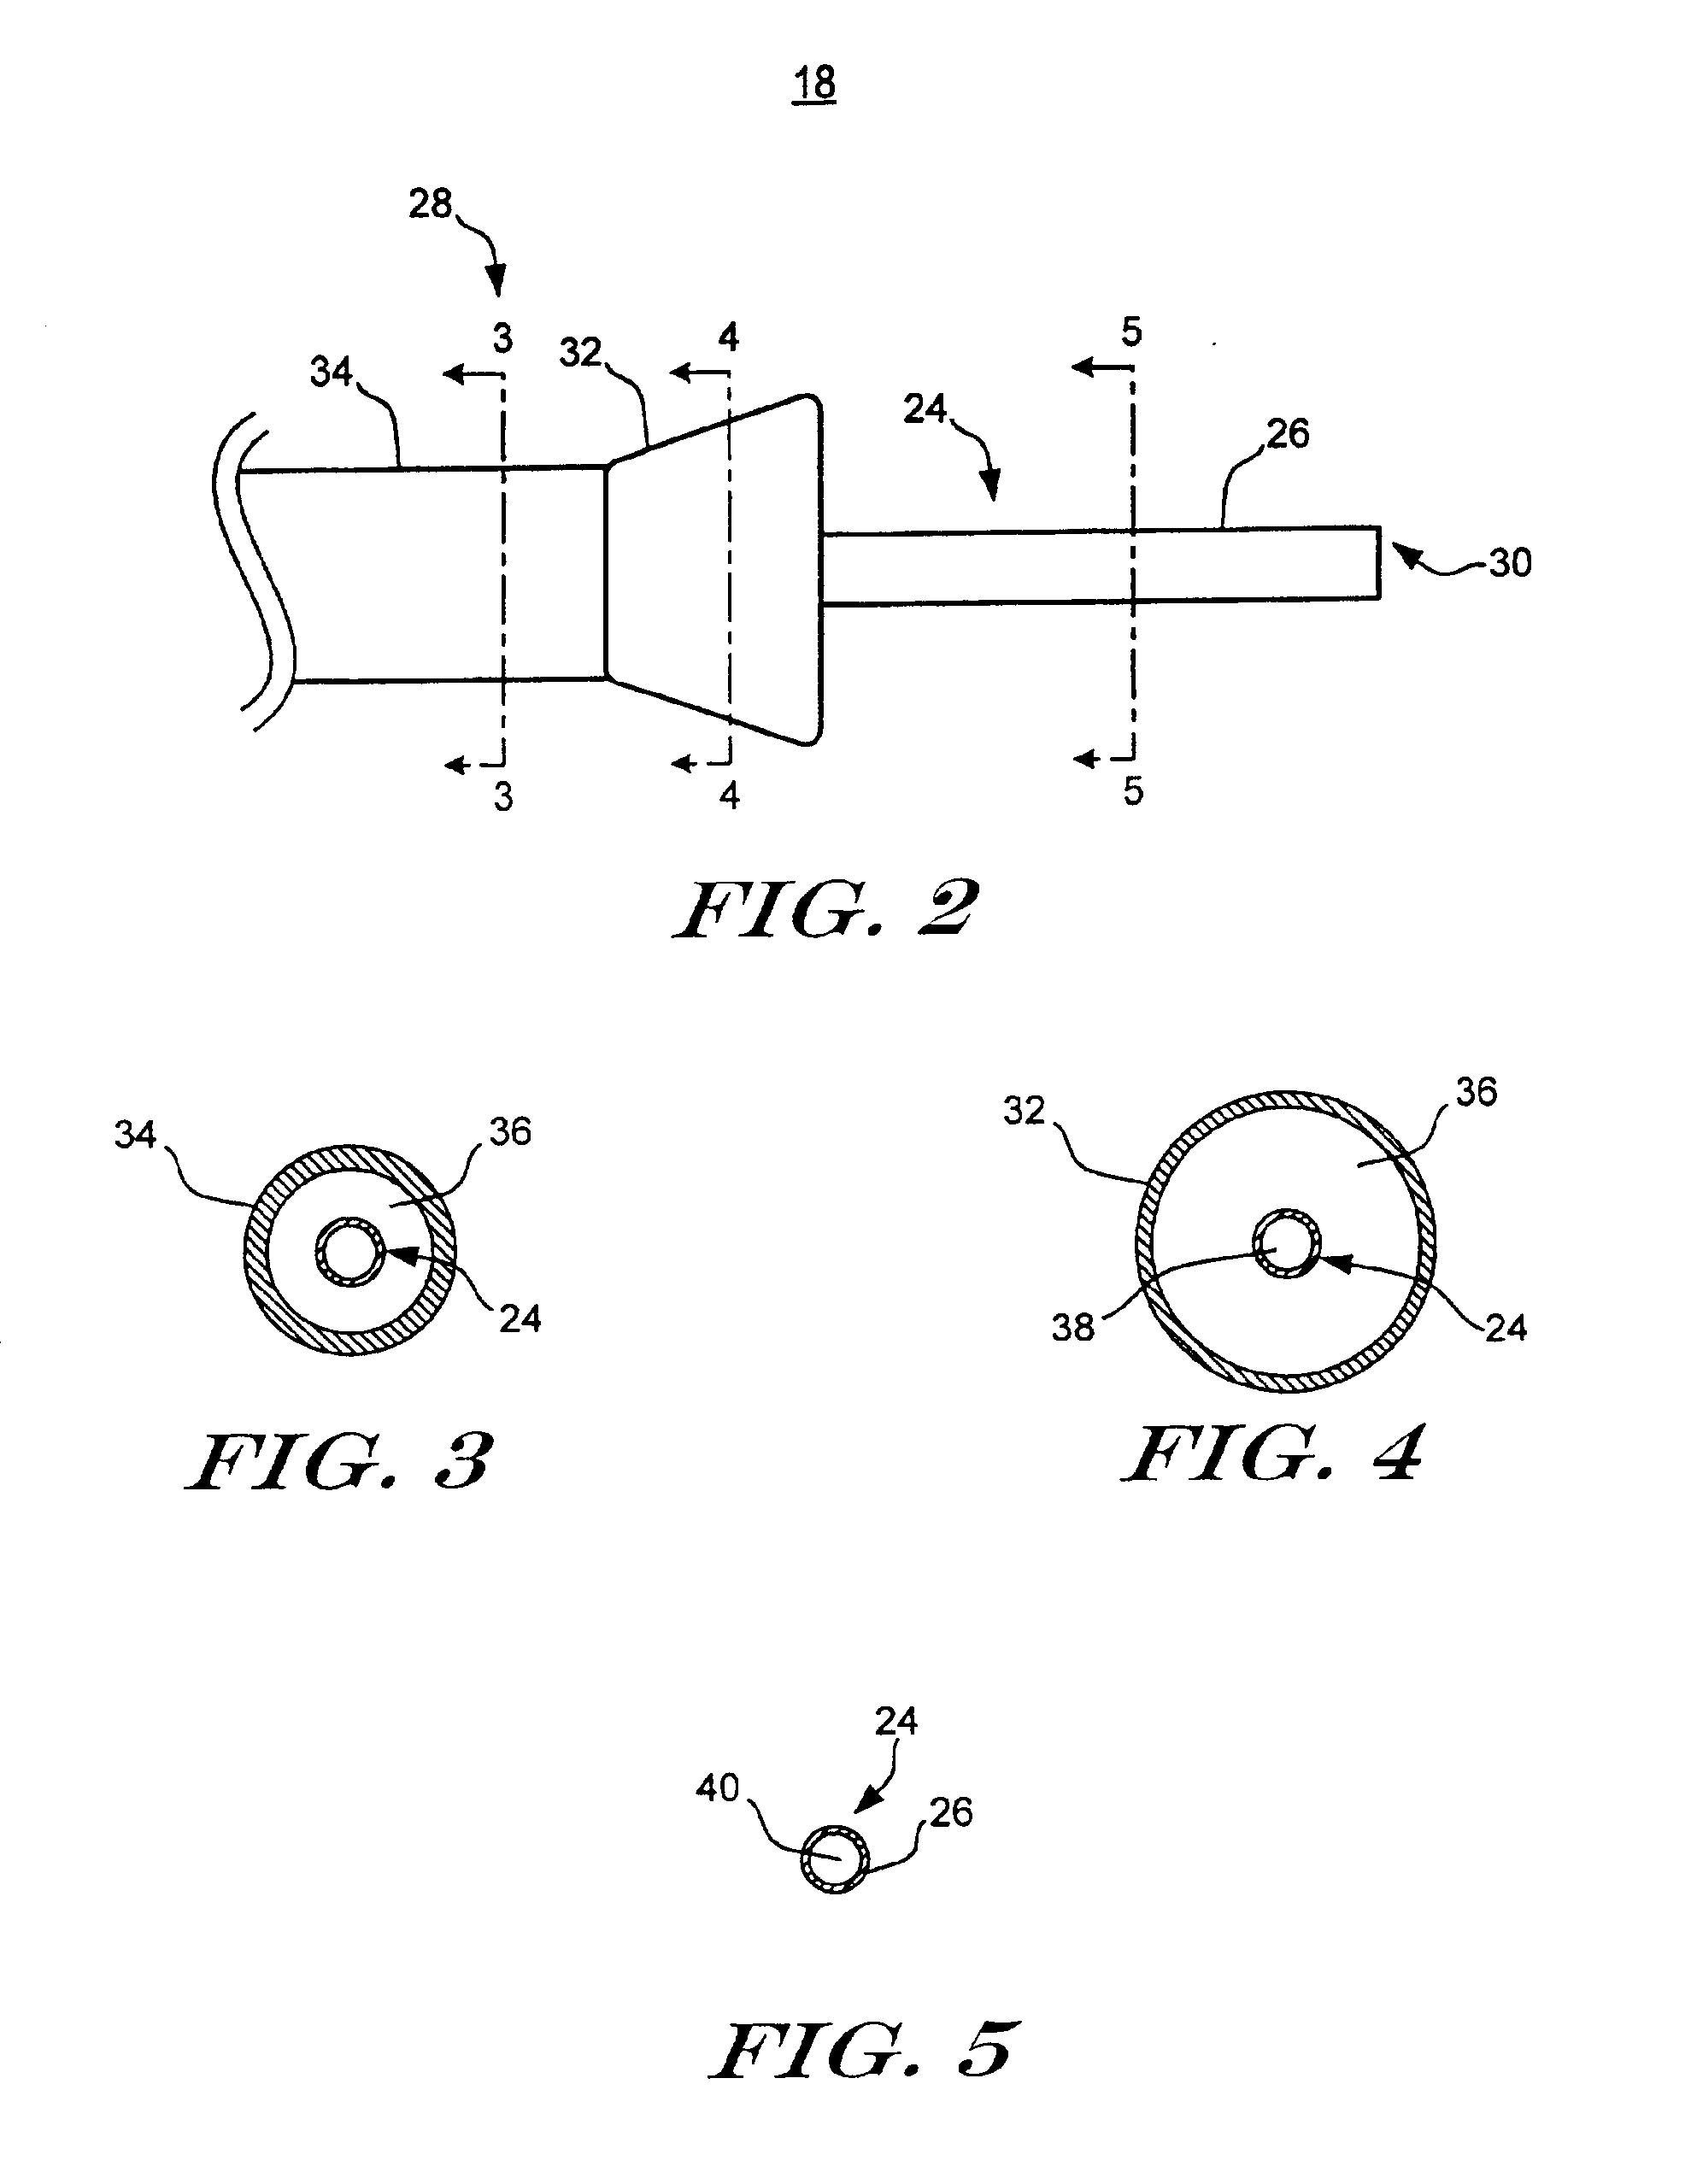 Needle-less injection apparatus and method